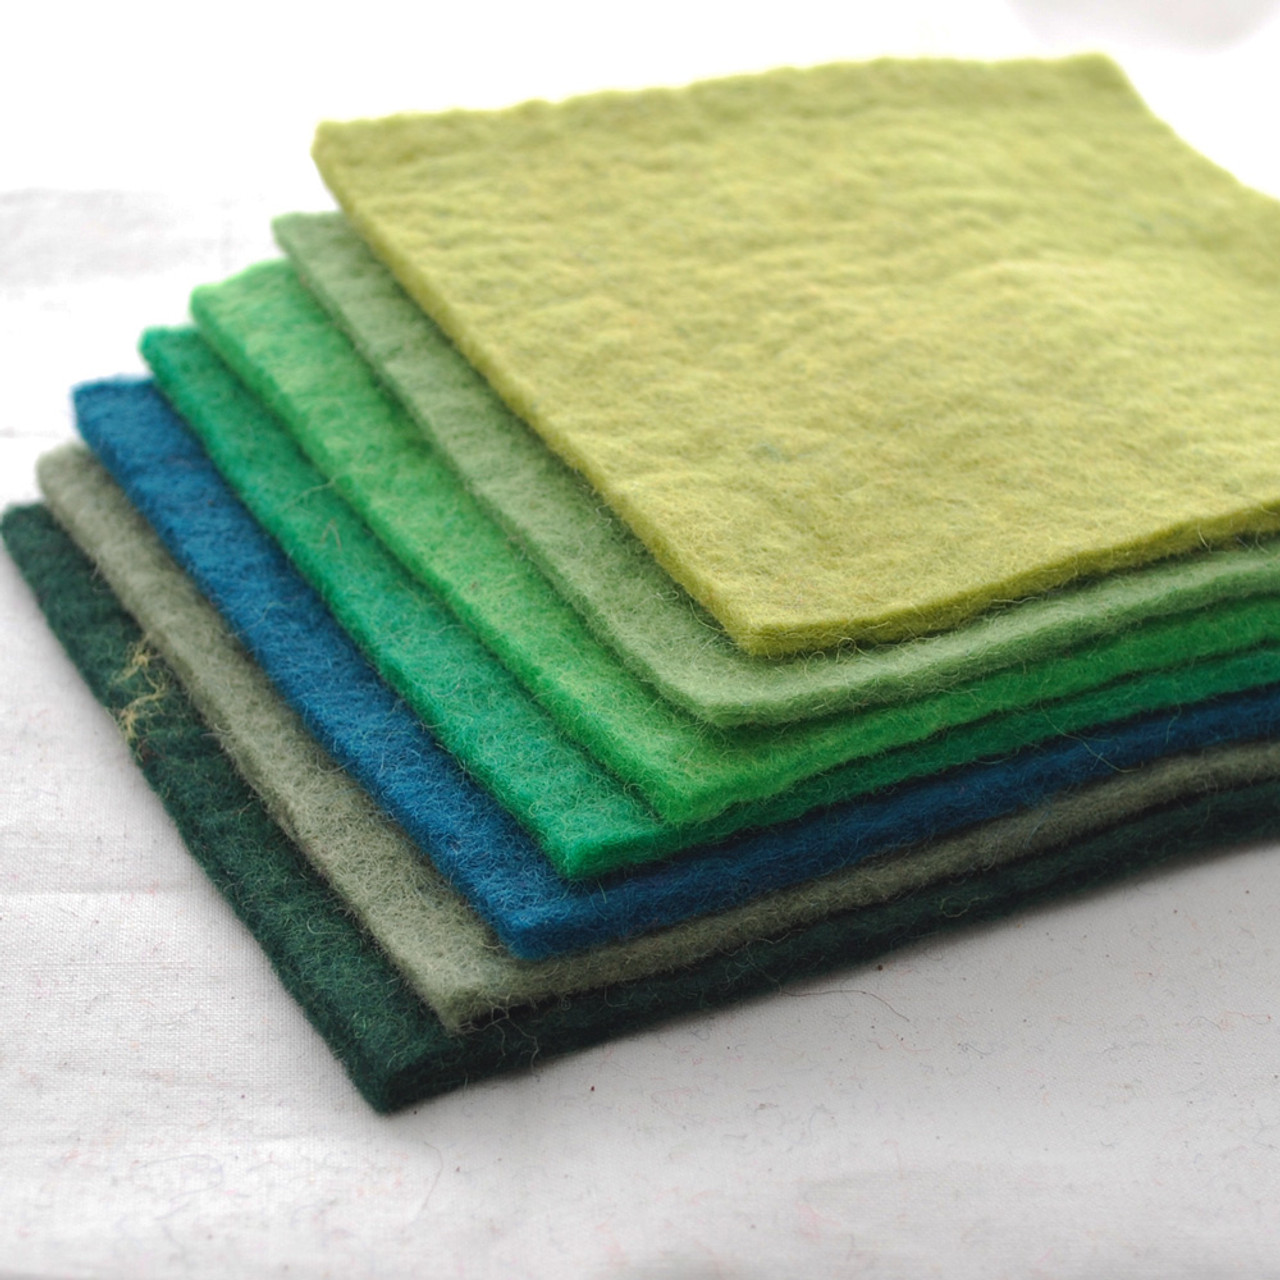 Download Handmade 100% Wool Felt Sheets - Approx 5mm Thick - 6 ...